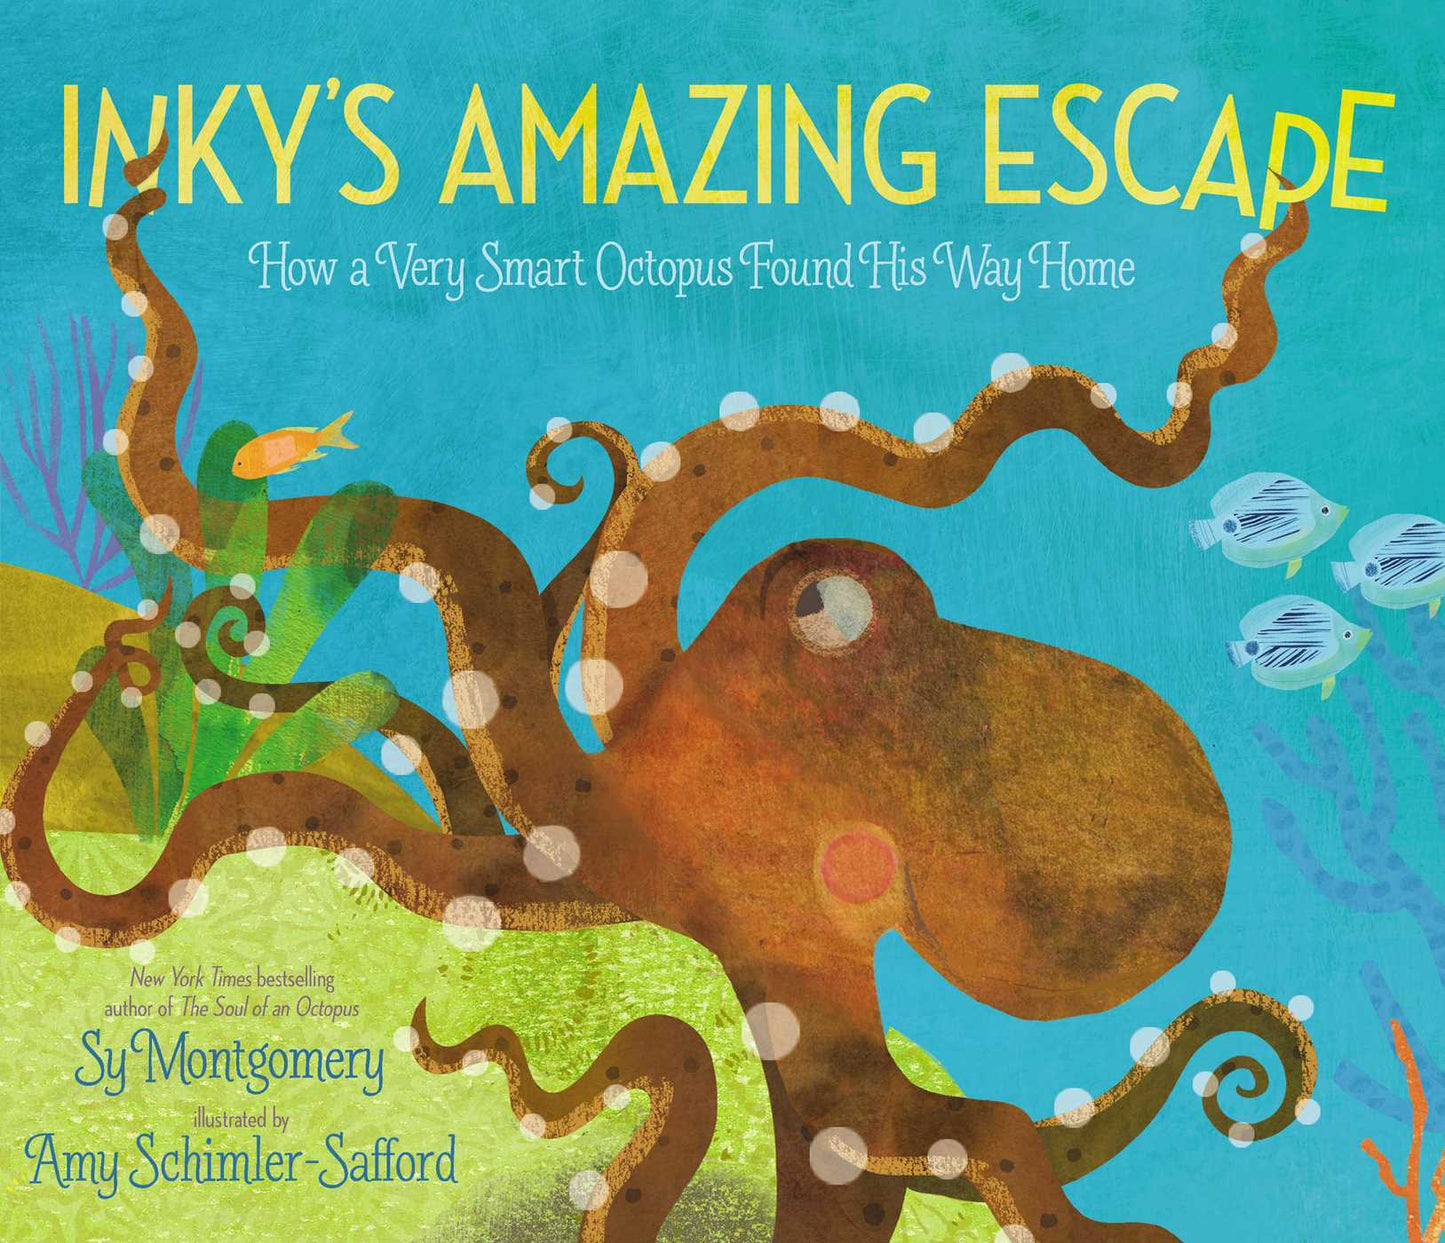 Inky's Amazing Escape: How a Very Smart Octopus Found His Way Home by Sy Montgomery and Amy Schimler-Safford